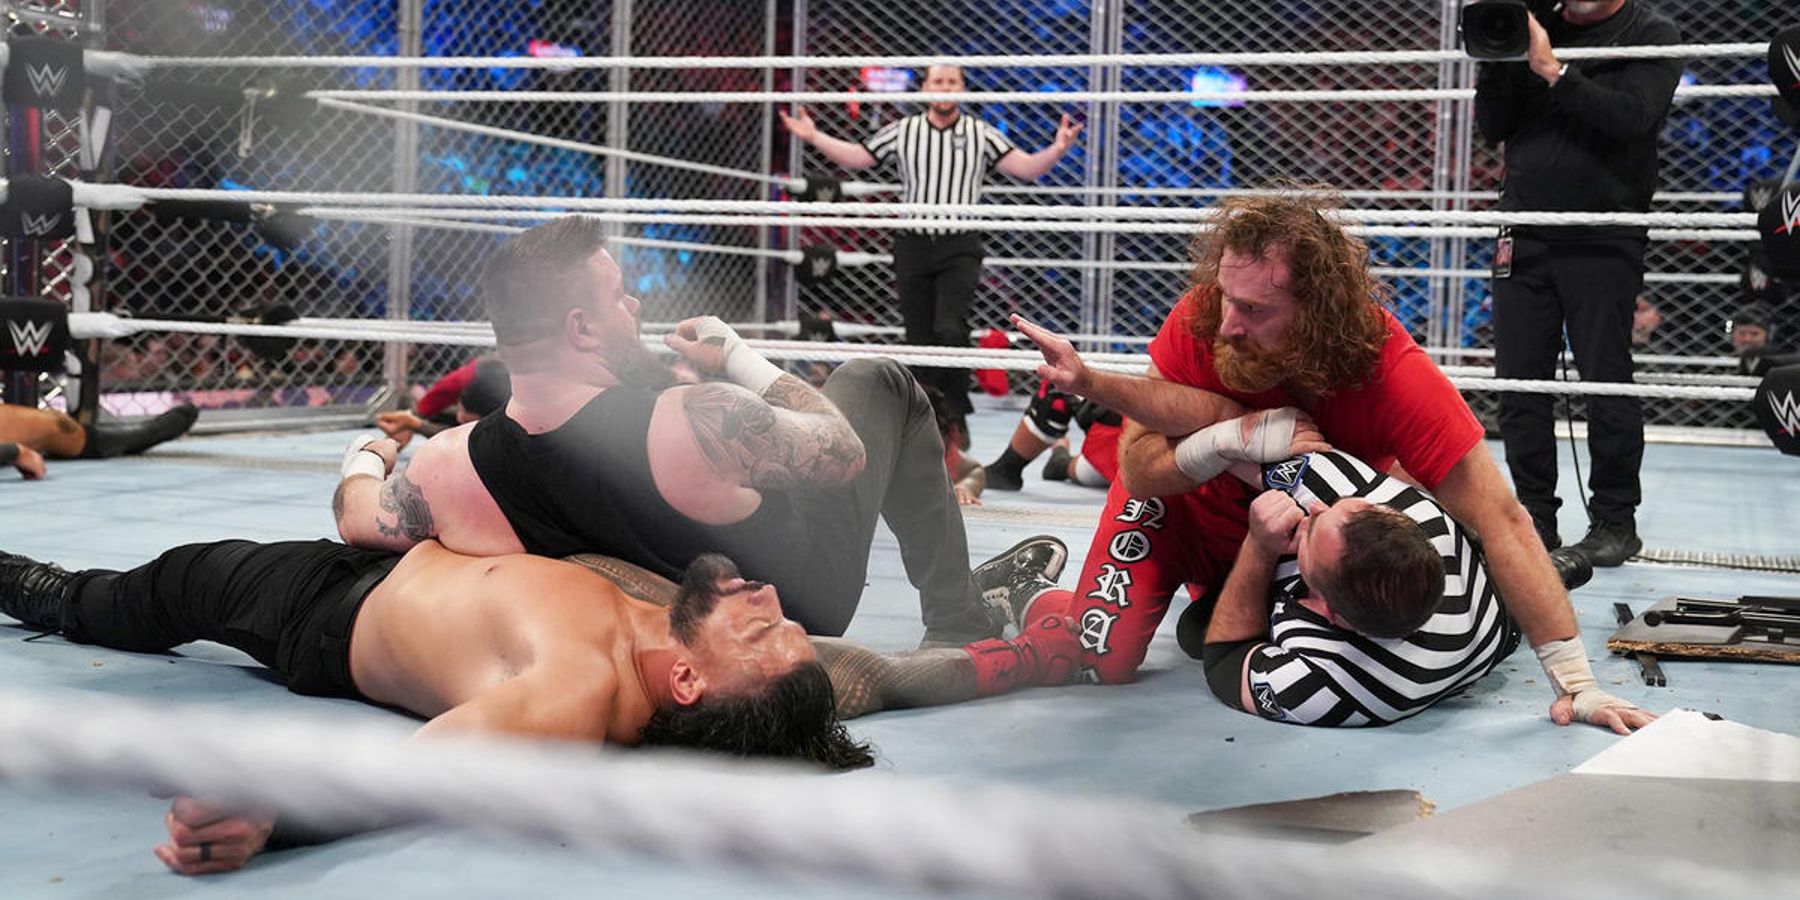 Sami Zayn prevents Kevin Owens from pinning Roman Reigns during the War Games match at WWE Survivor Series in 2022.